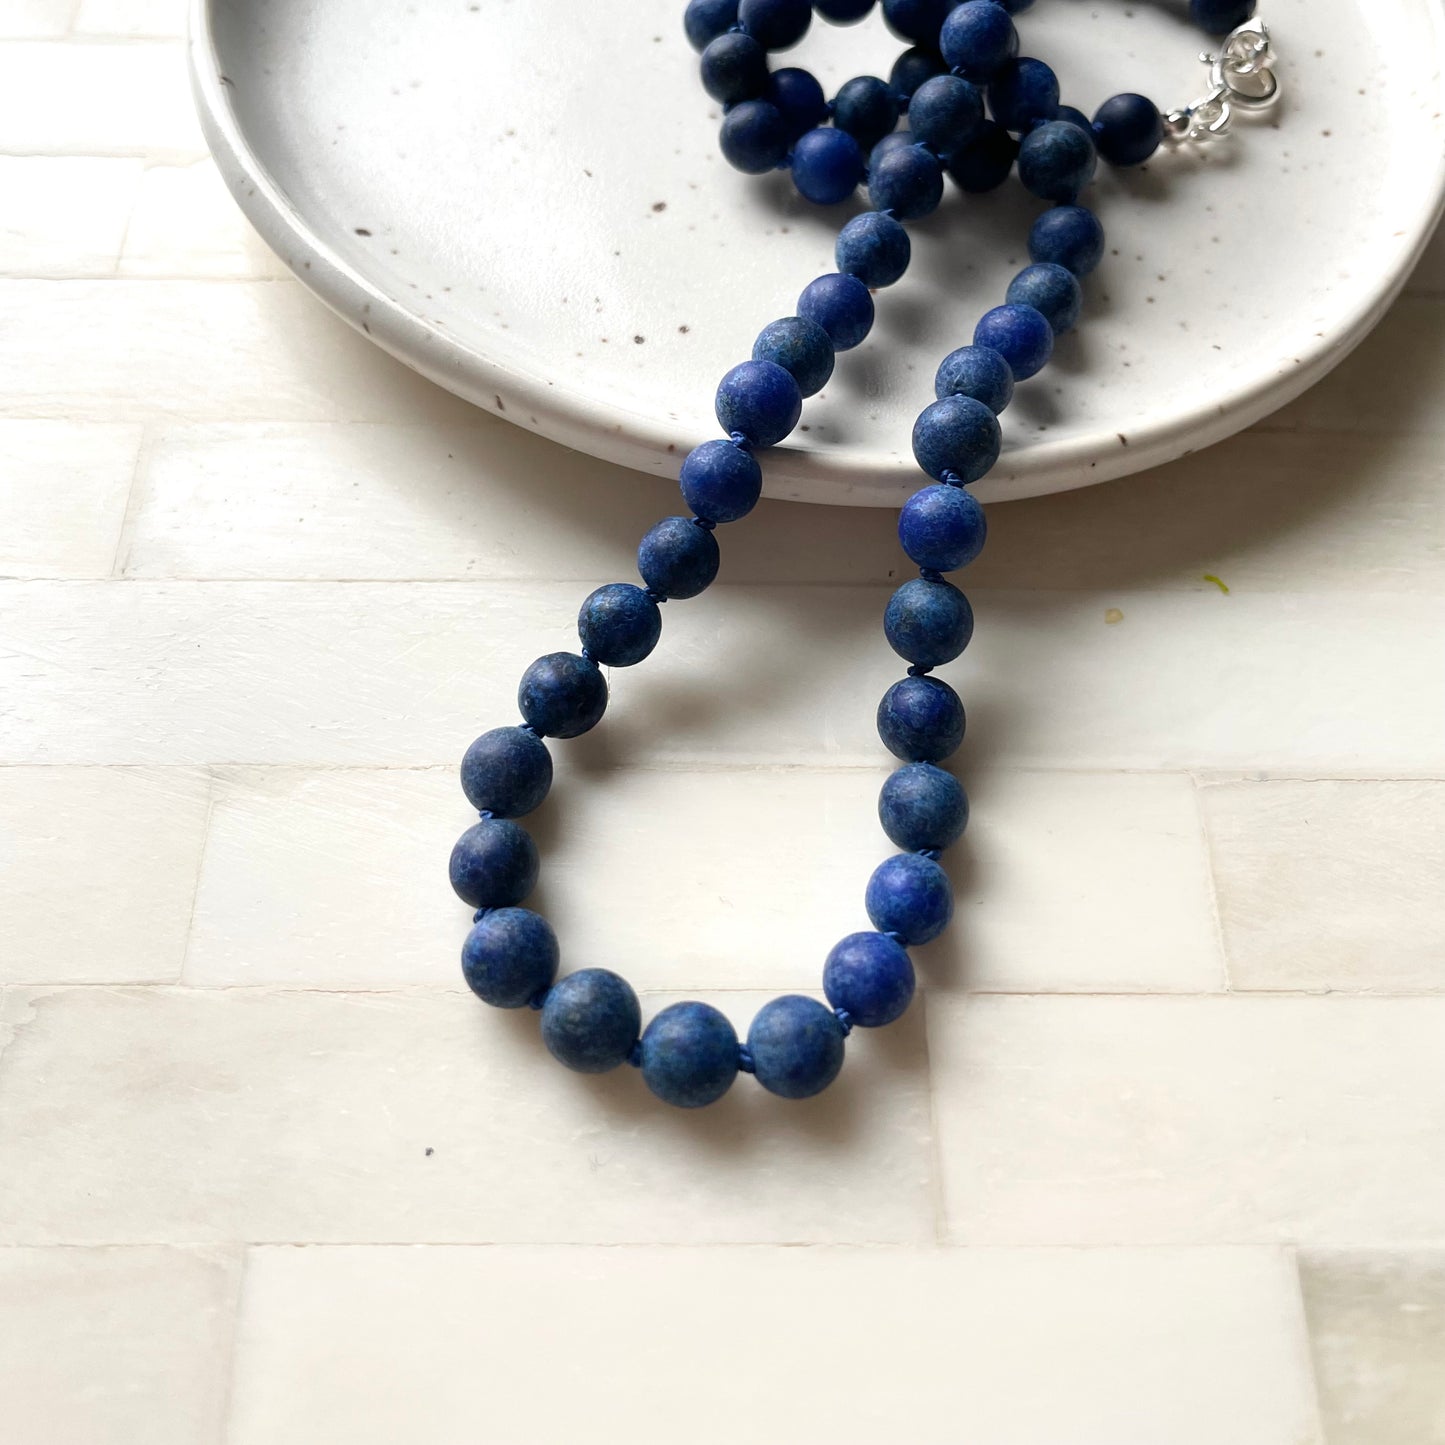 Lapis Lazuli beaded necklace made in Canada by Wallis Designs. Hand knotted stones on silk thread.